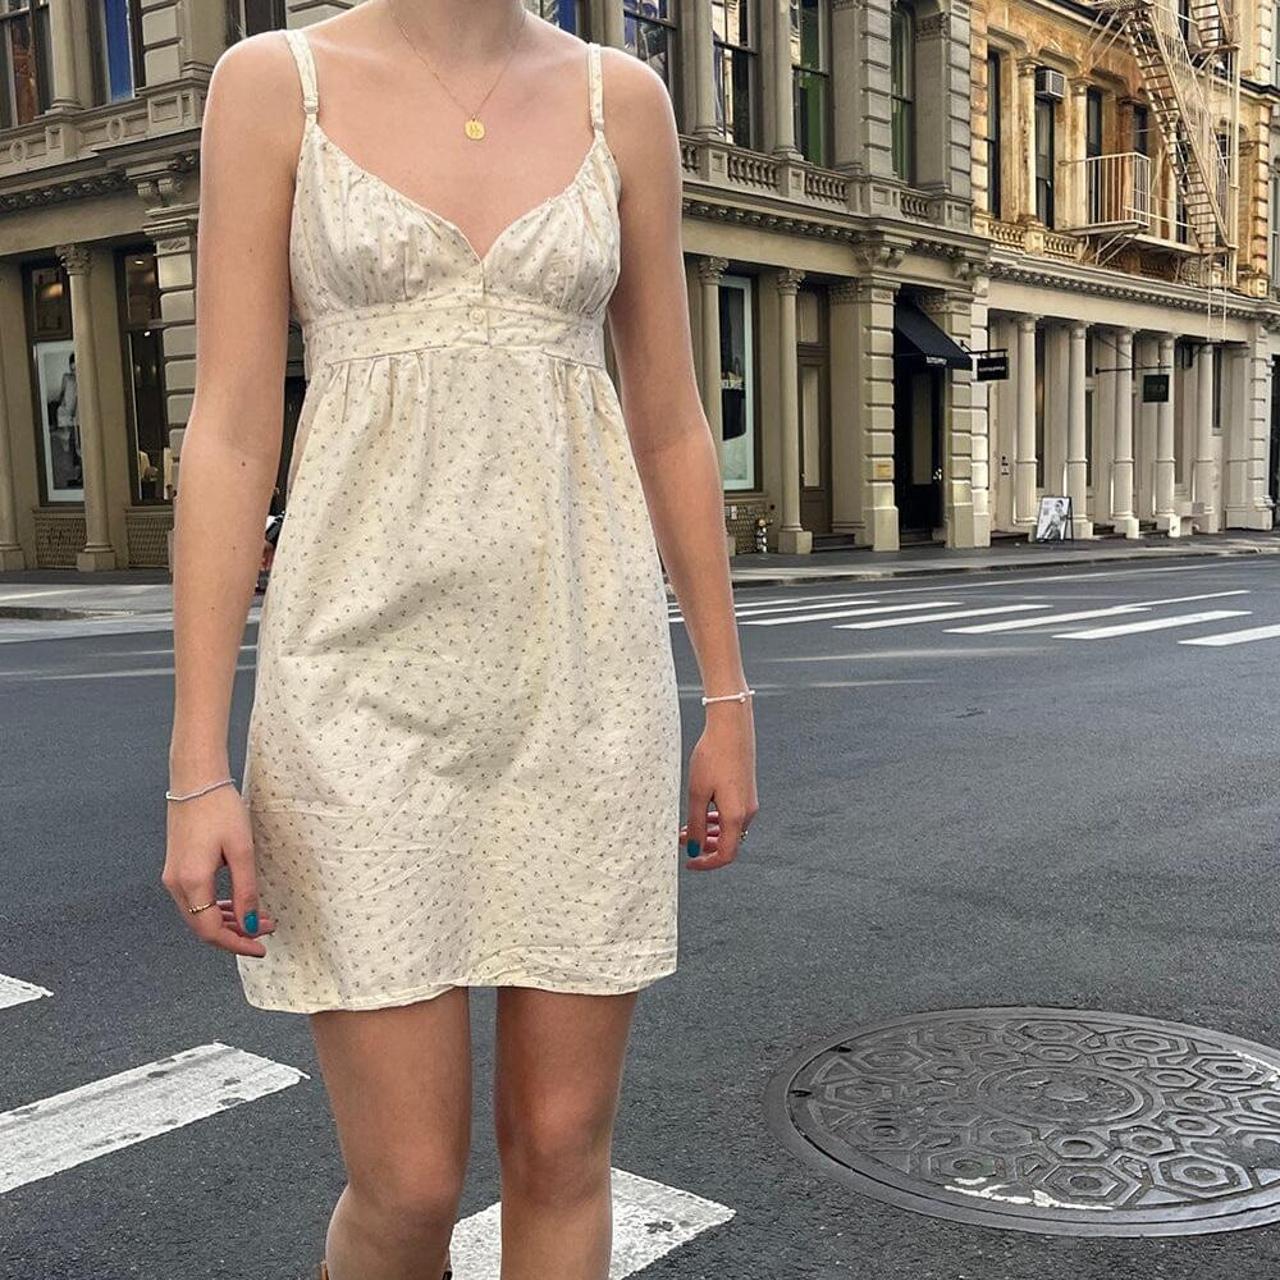 brand new without tag brandy melville arianna soft dress, Women's